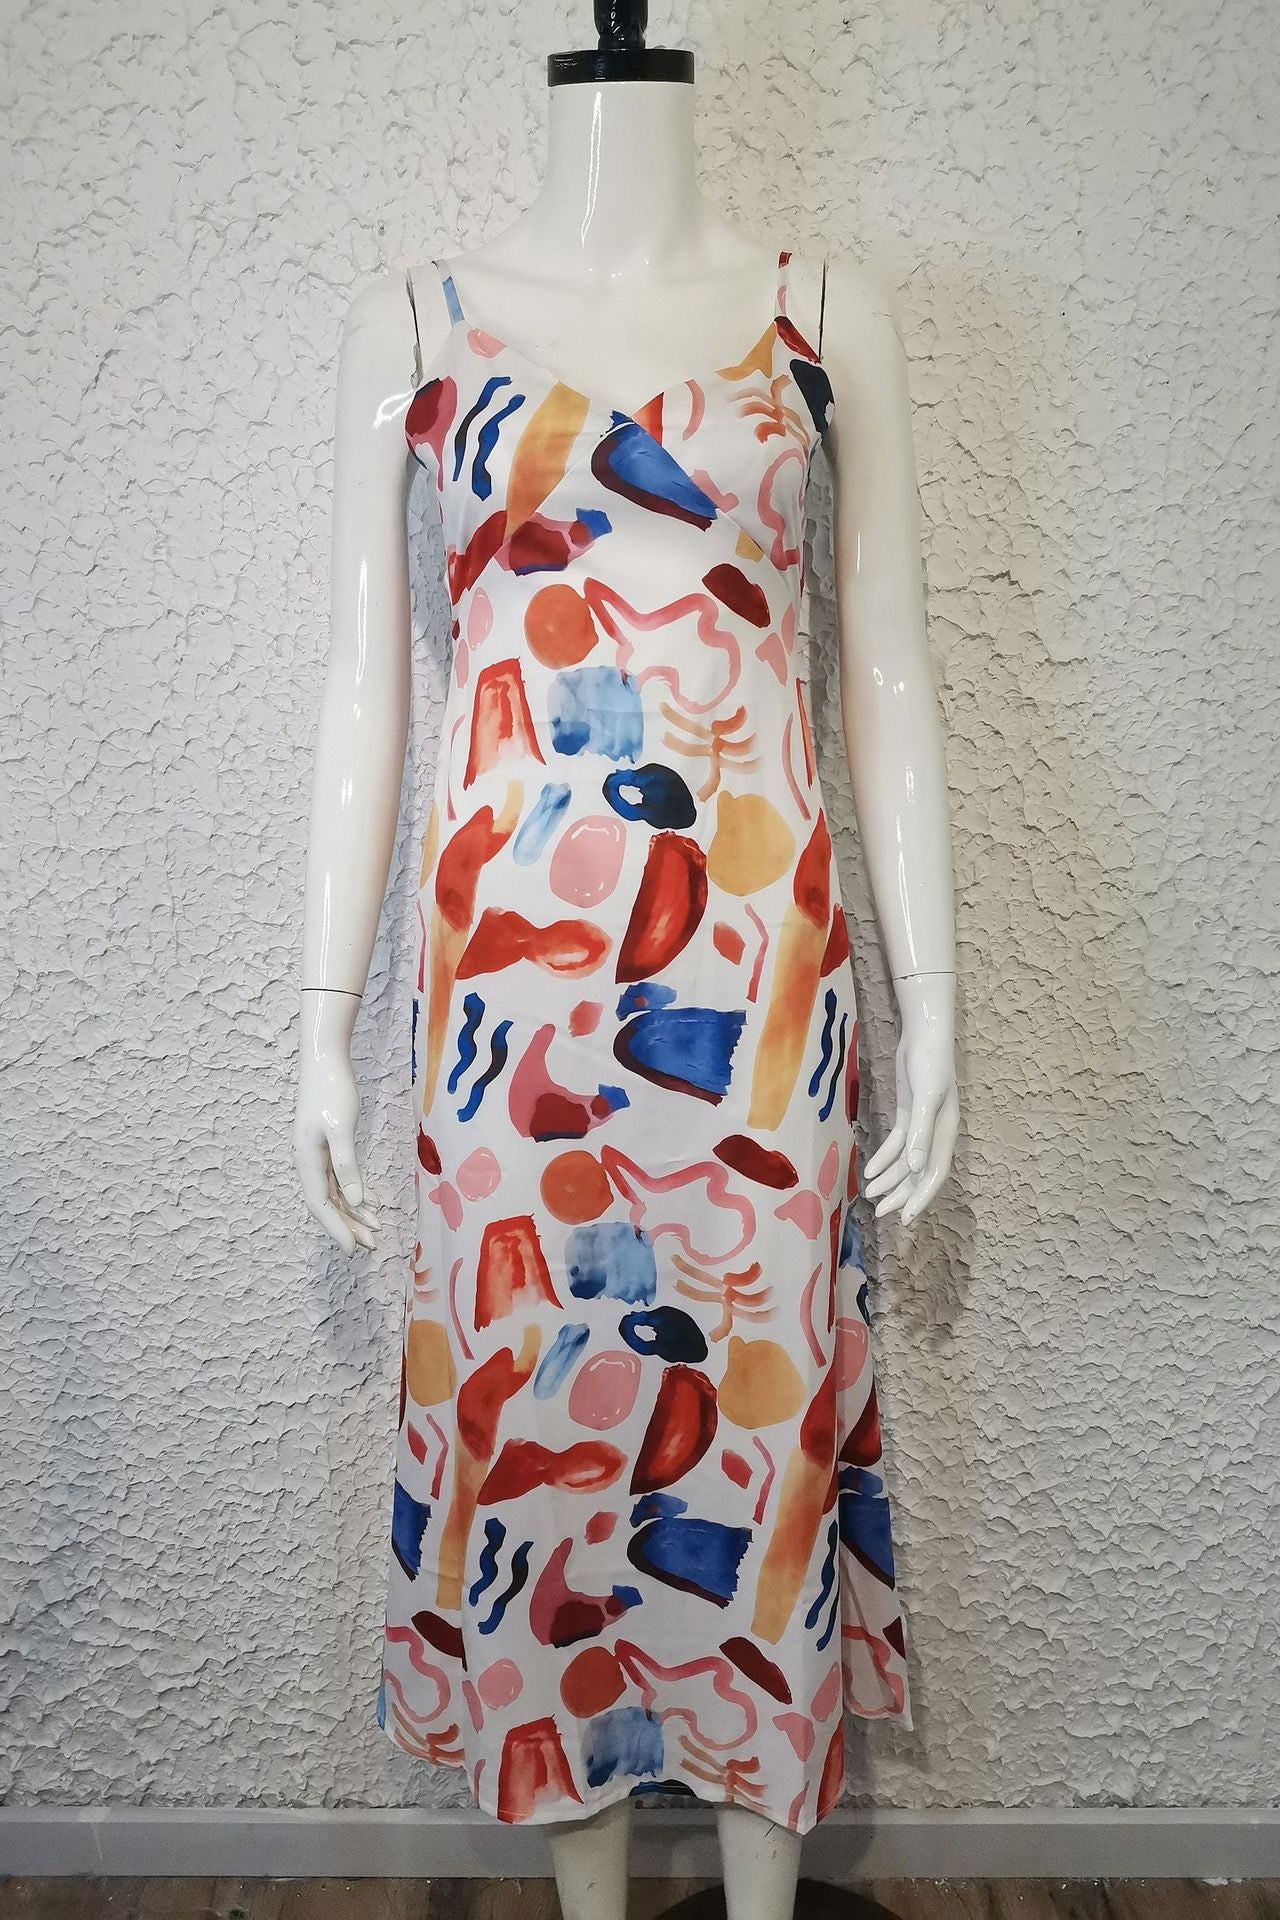 Sexy Cut Out Print Backless Maxi Dress